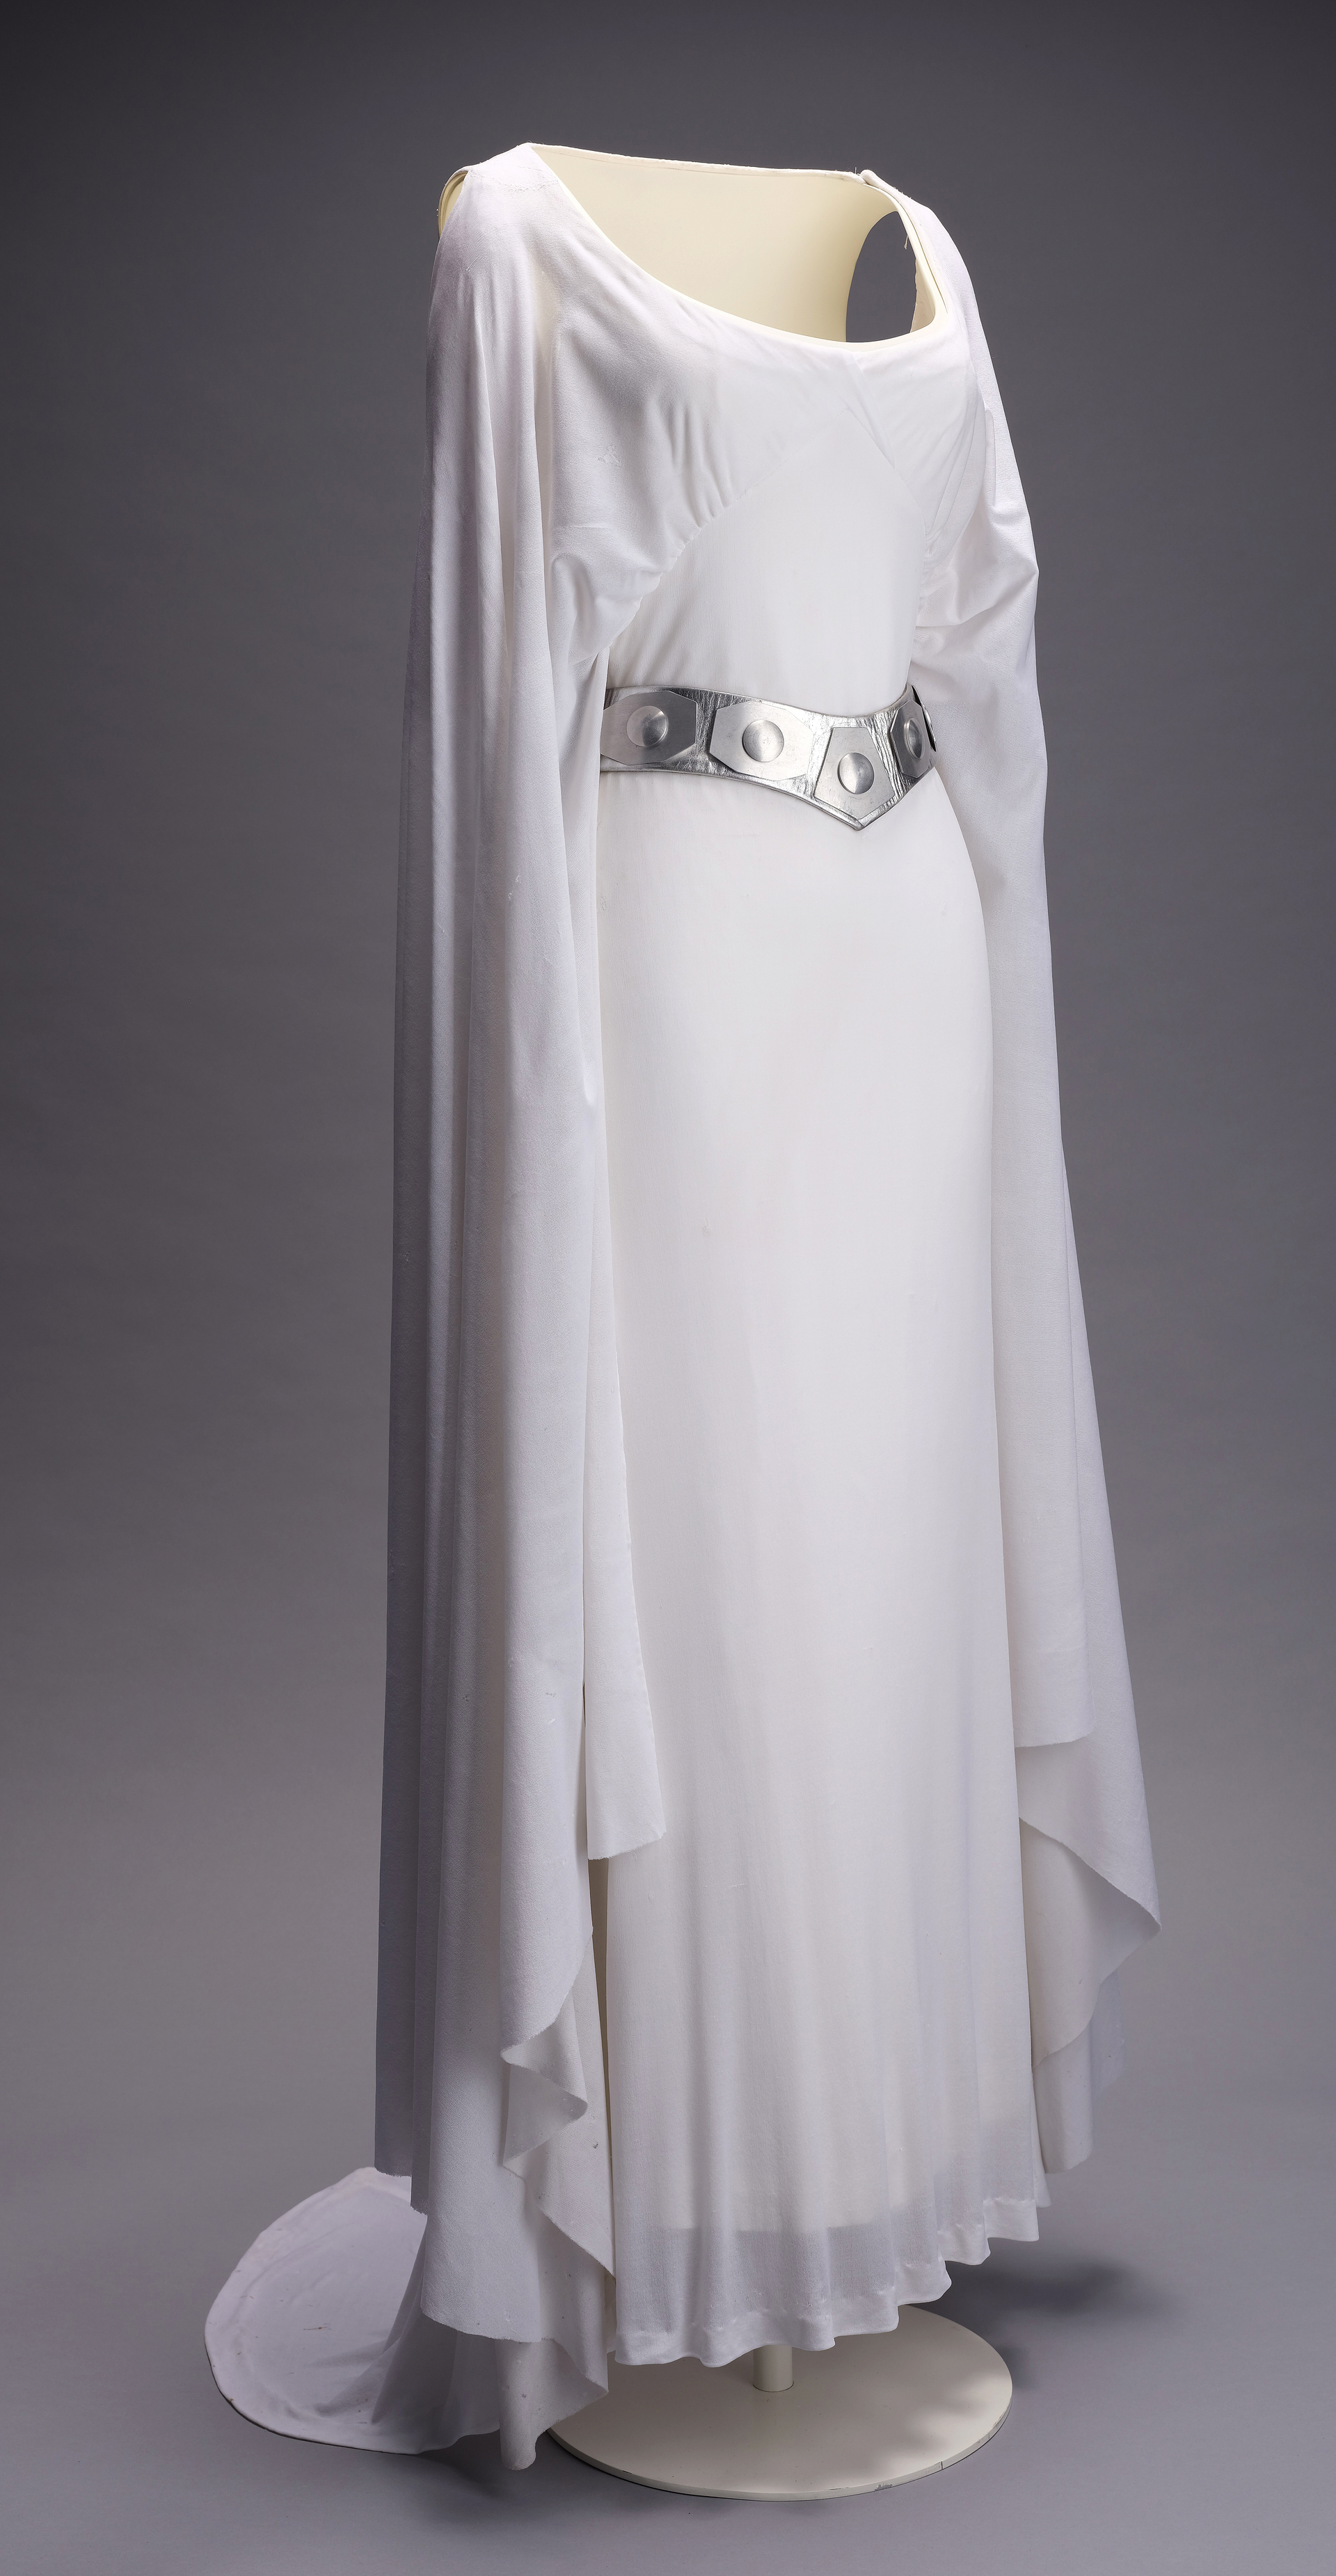 STAR WARS: A NEW HOPE (1977) - Princess Leia's (Carrie Fisher) Screen-Matched Ceremonial Dress - Image 3 of 39